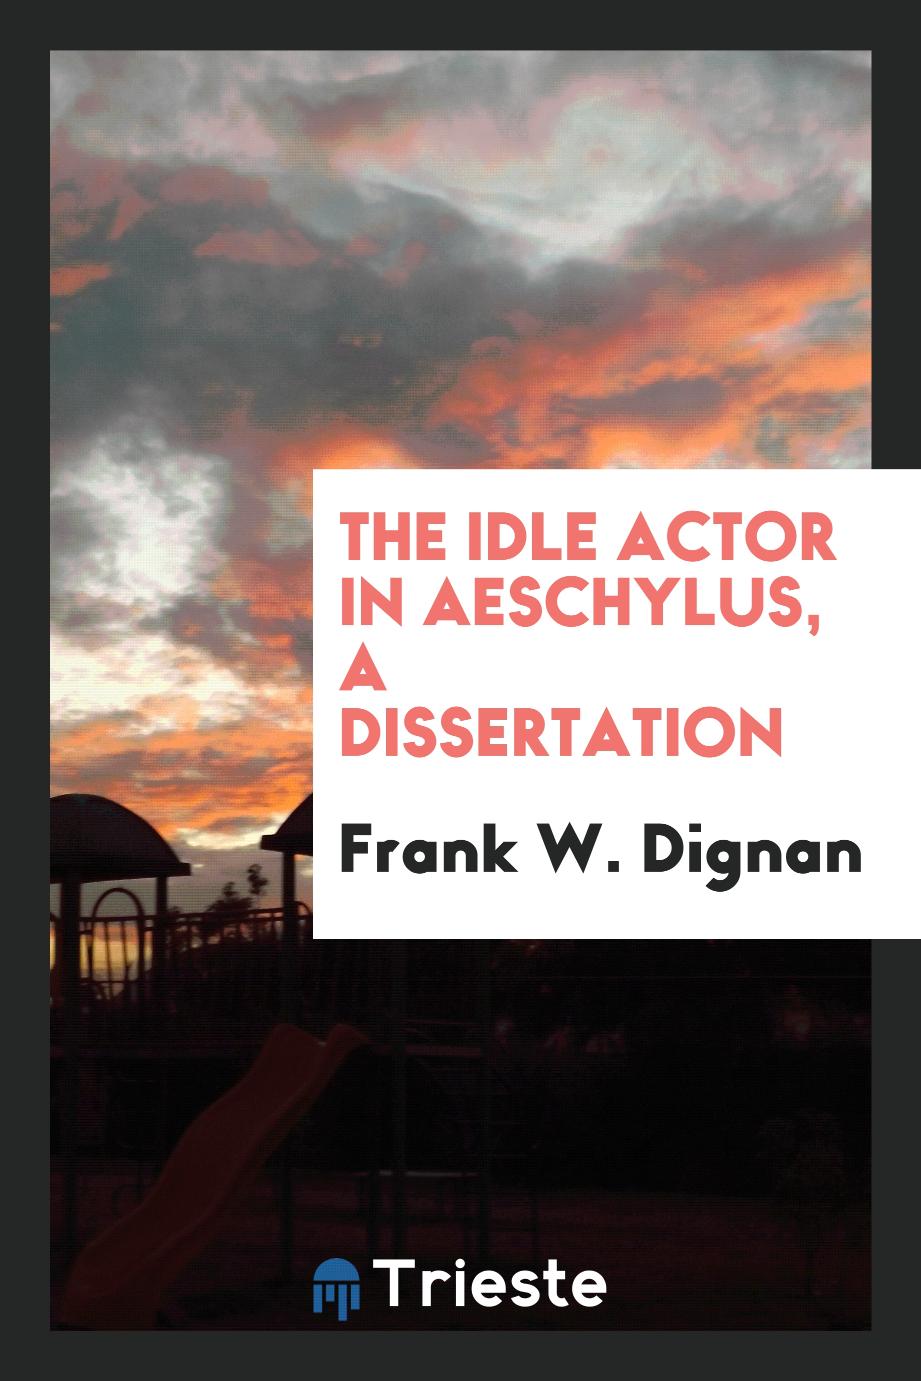 The idle actor in Aeschylus, A Dissertation